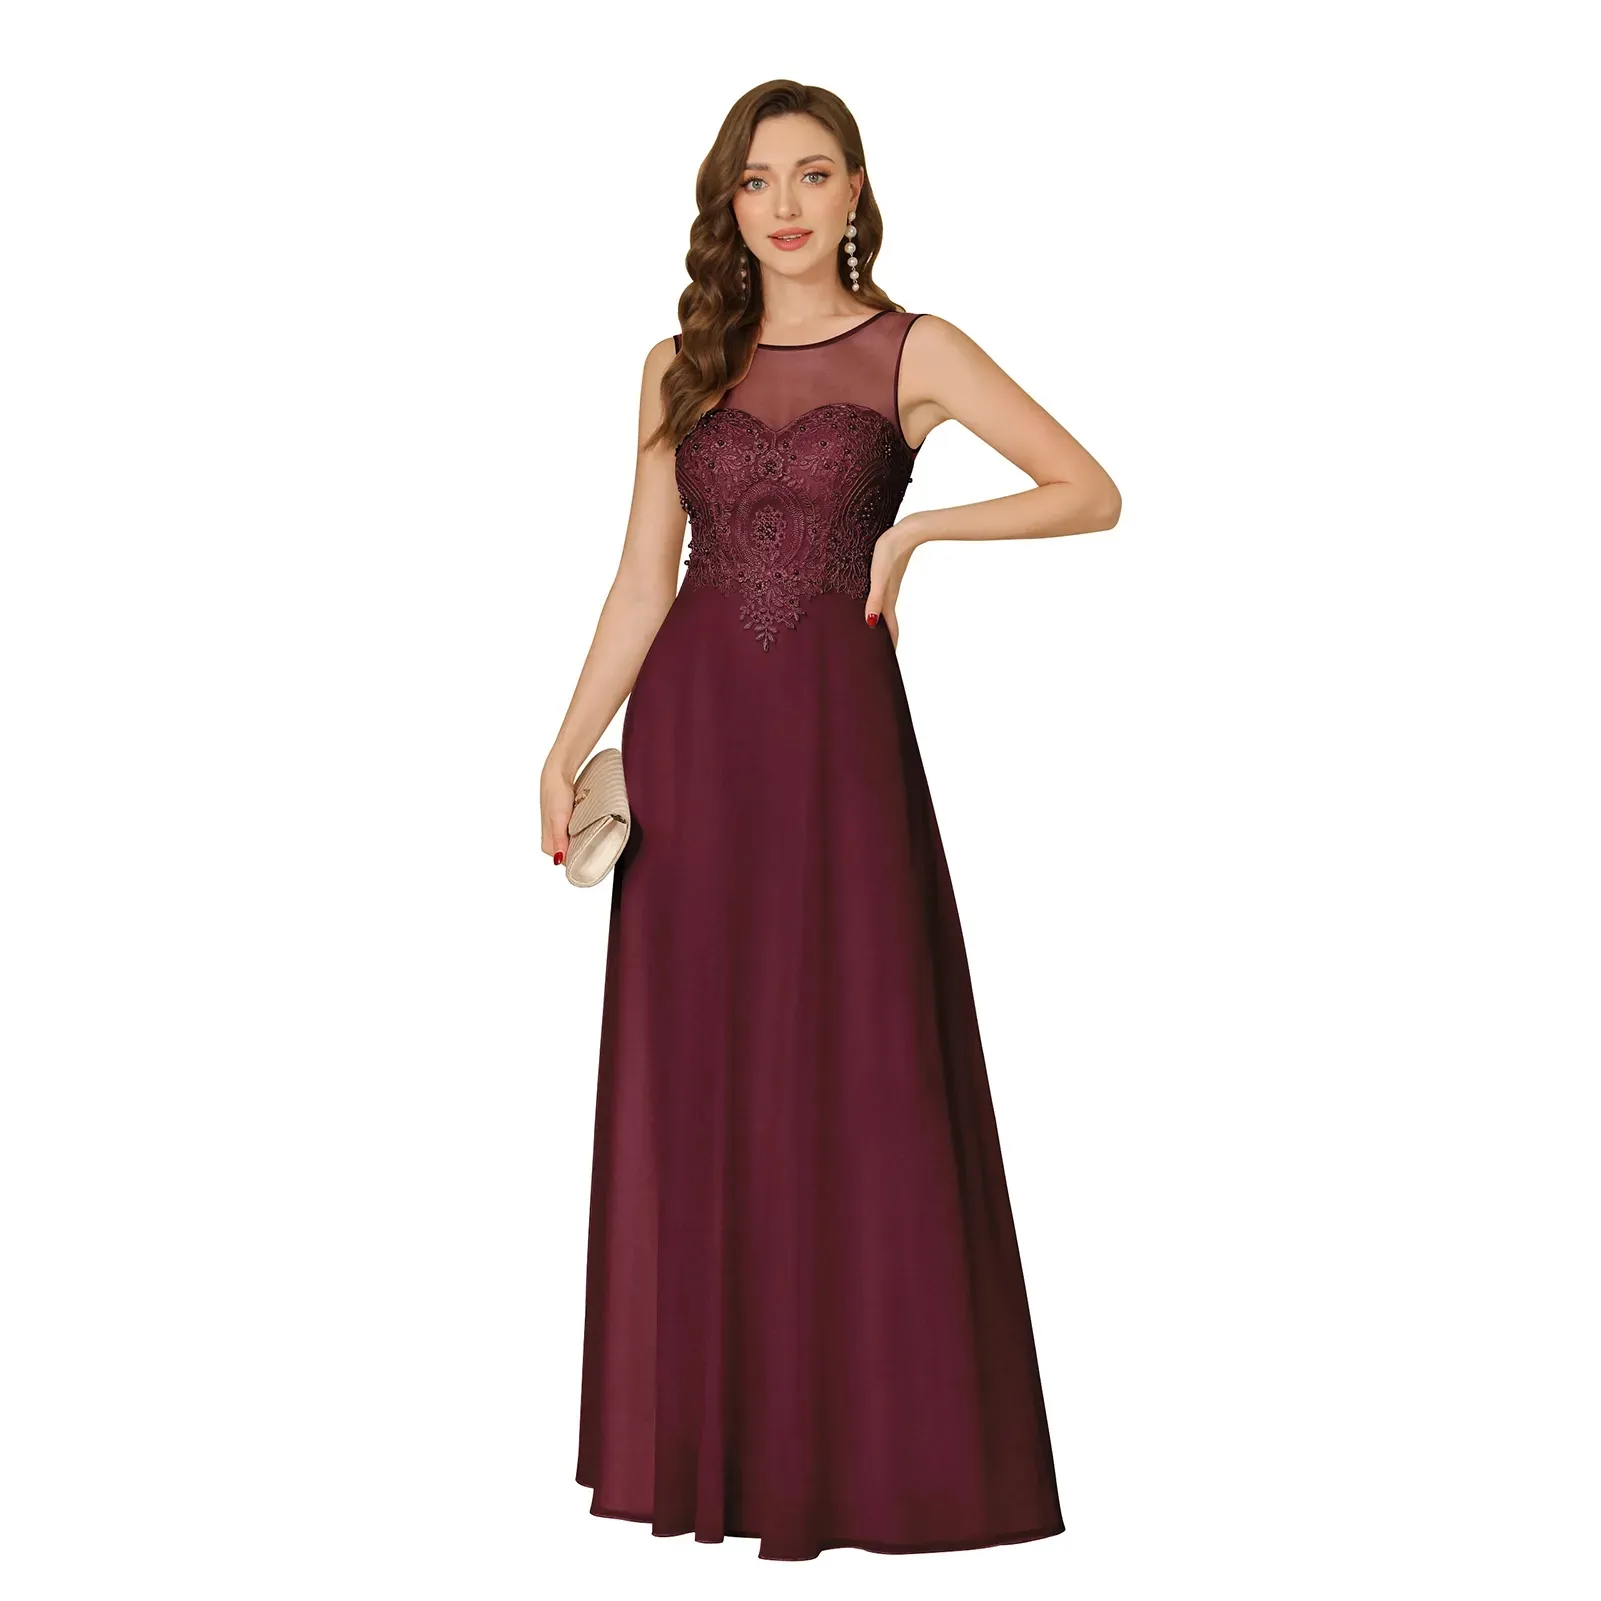 Dark Navy Burgundy Bridesmaid Dresses Sheer Neck Appliques Chiffon Long Maid of Honor Gowns A Line Guest Evening Prom Dress